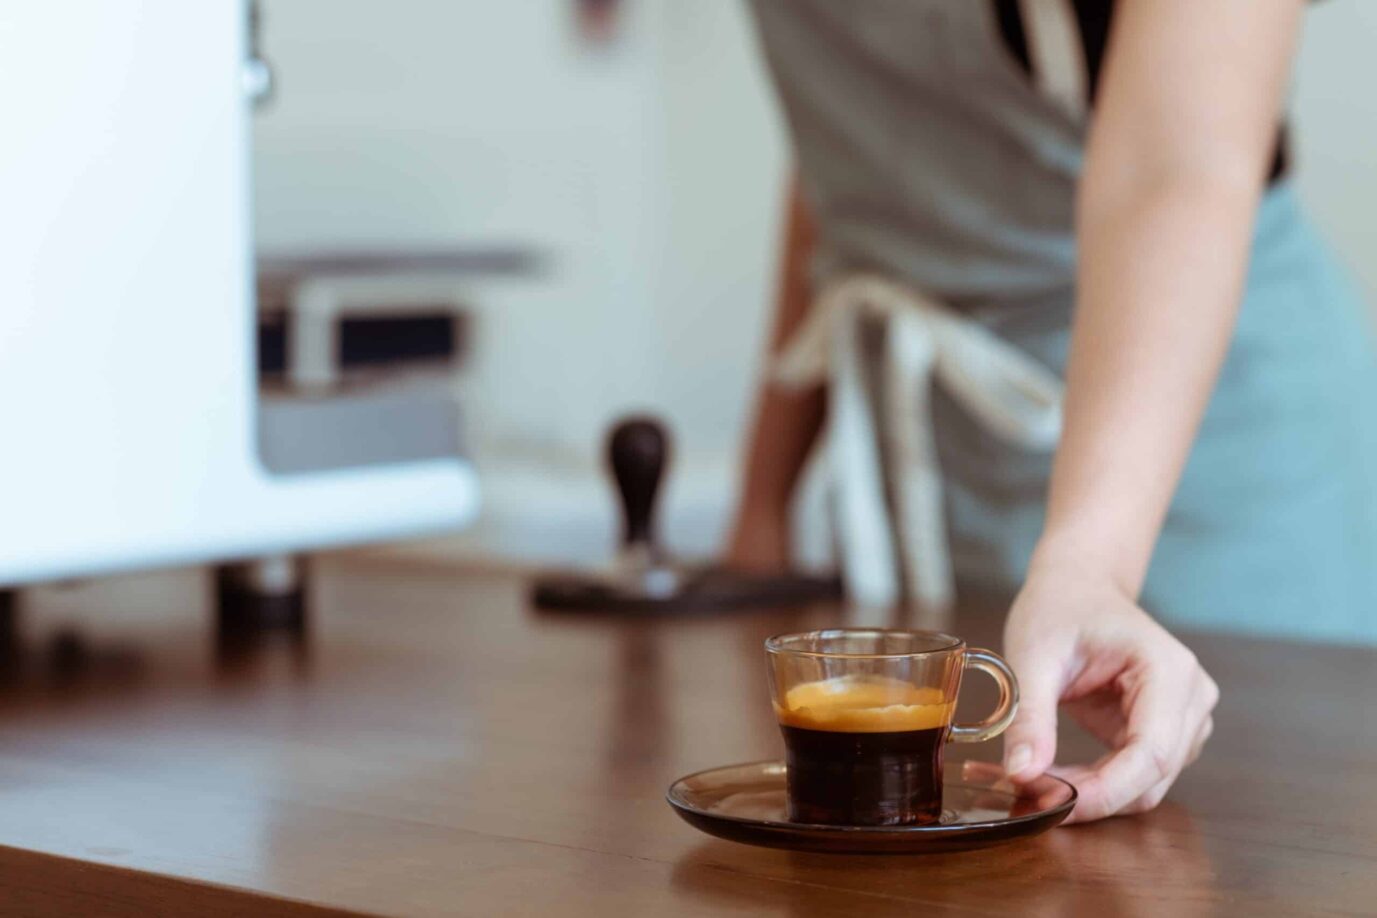 What to Order When You Need a Strong Cup of Coffee